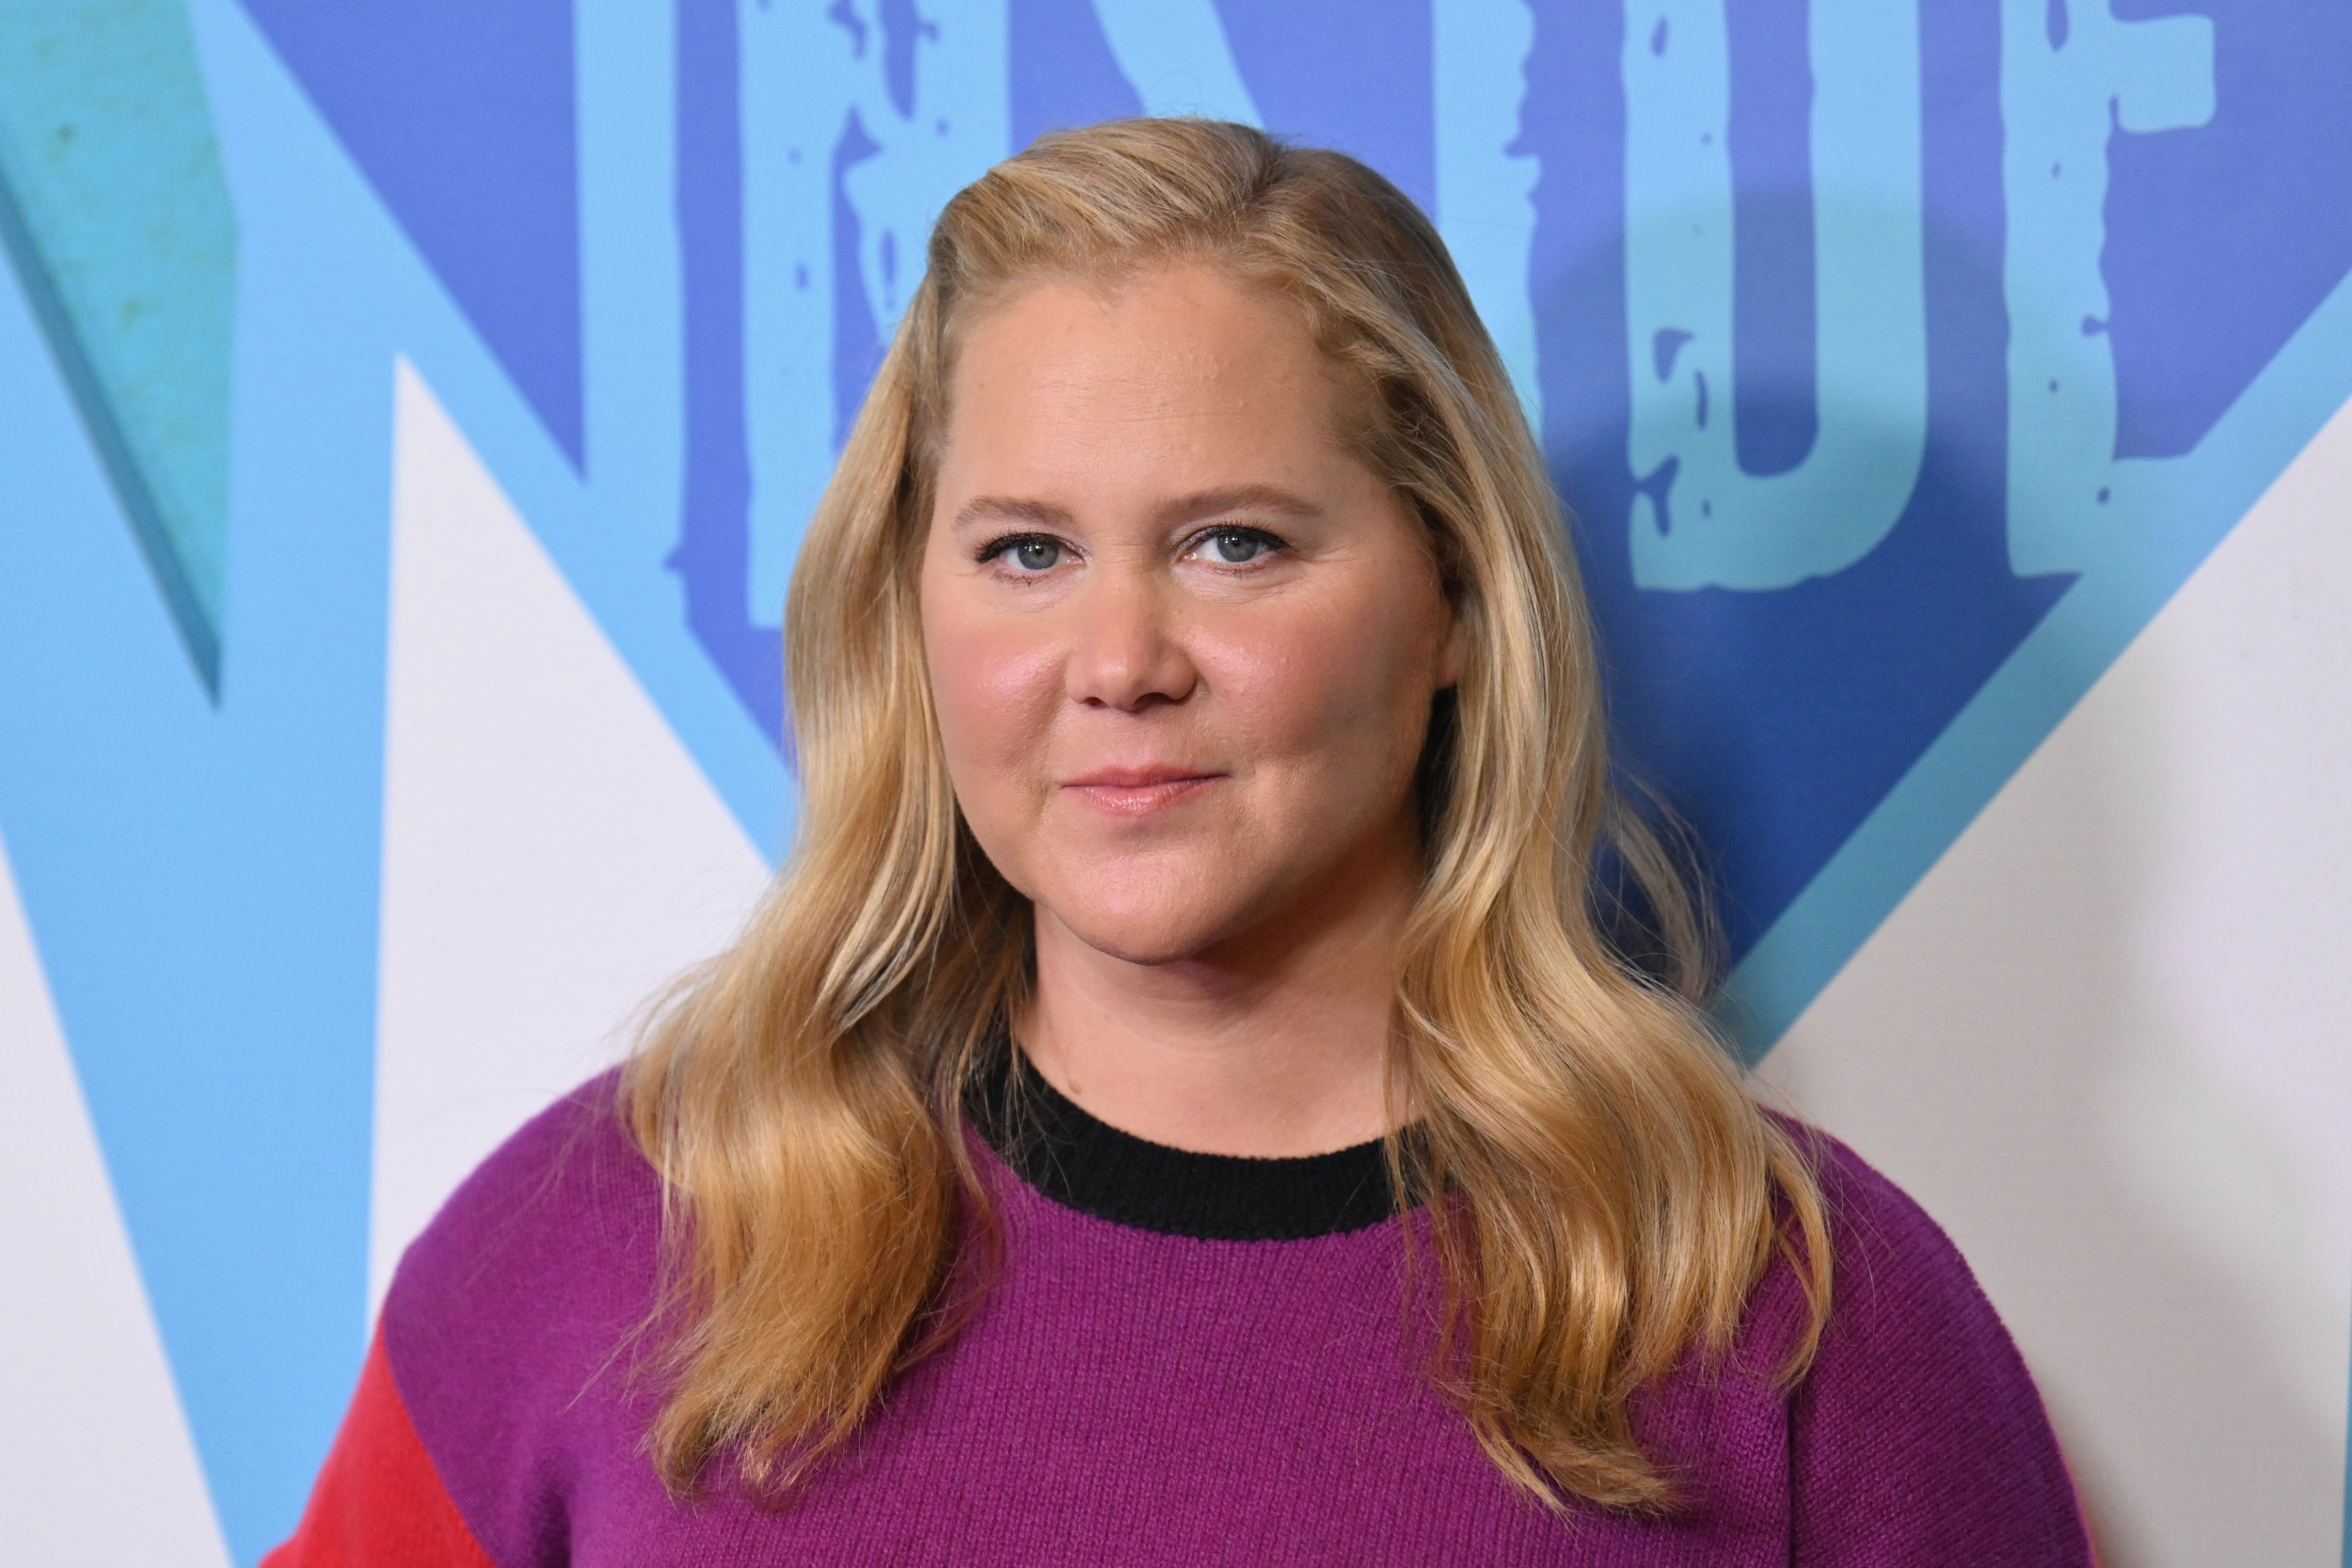 Amy Schumer Reacts After Getting Canceled